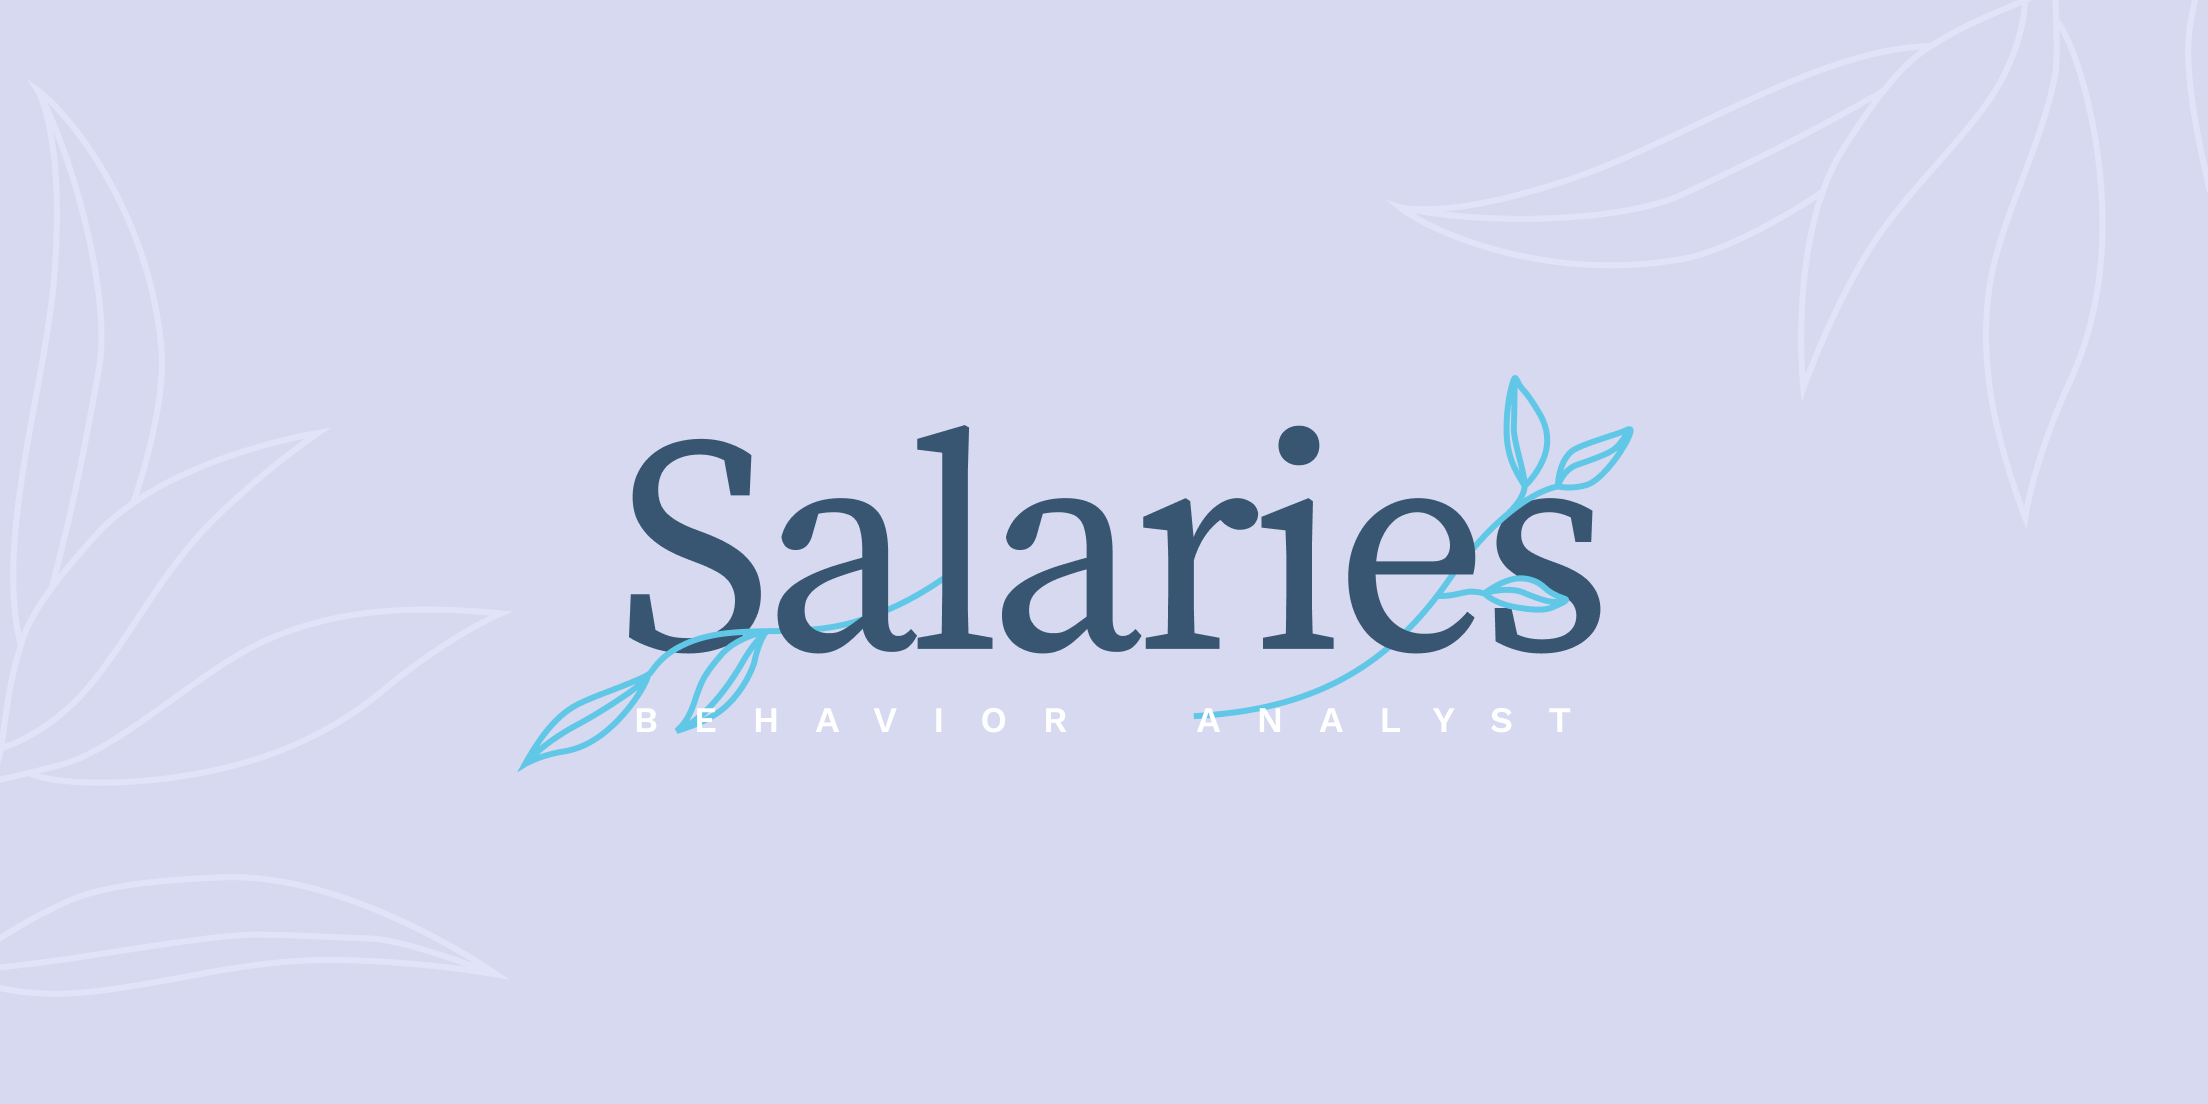 Behavior Analyst Salaries in 2022 (By State)